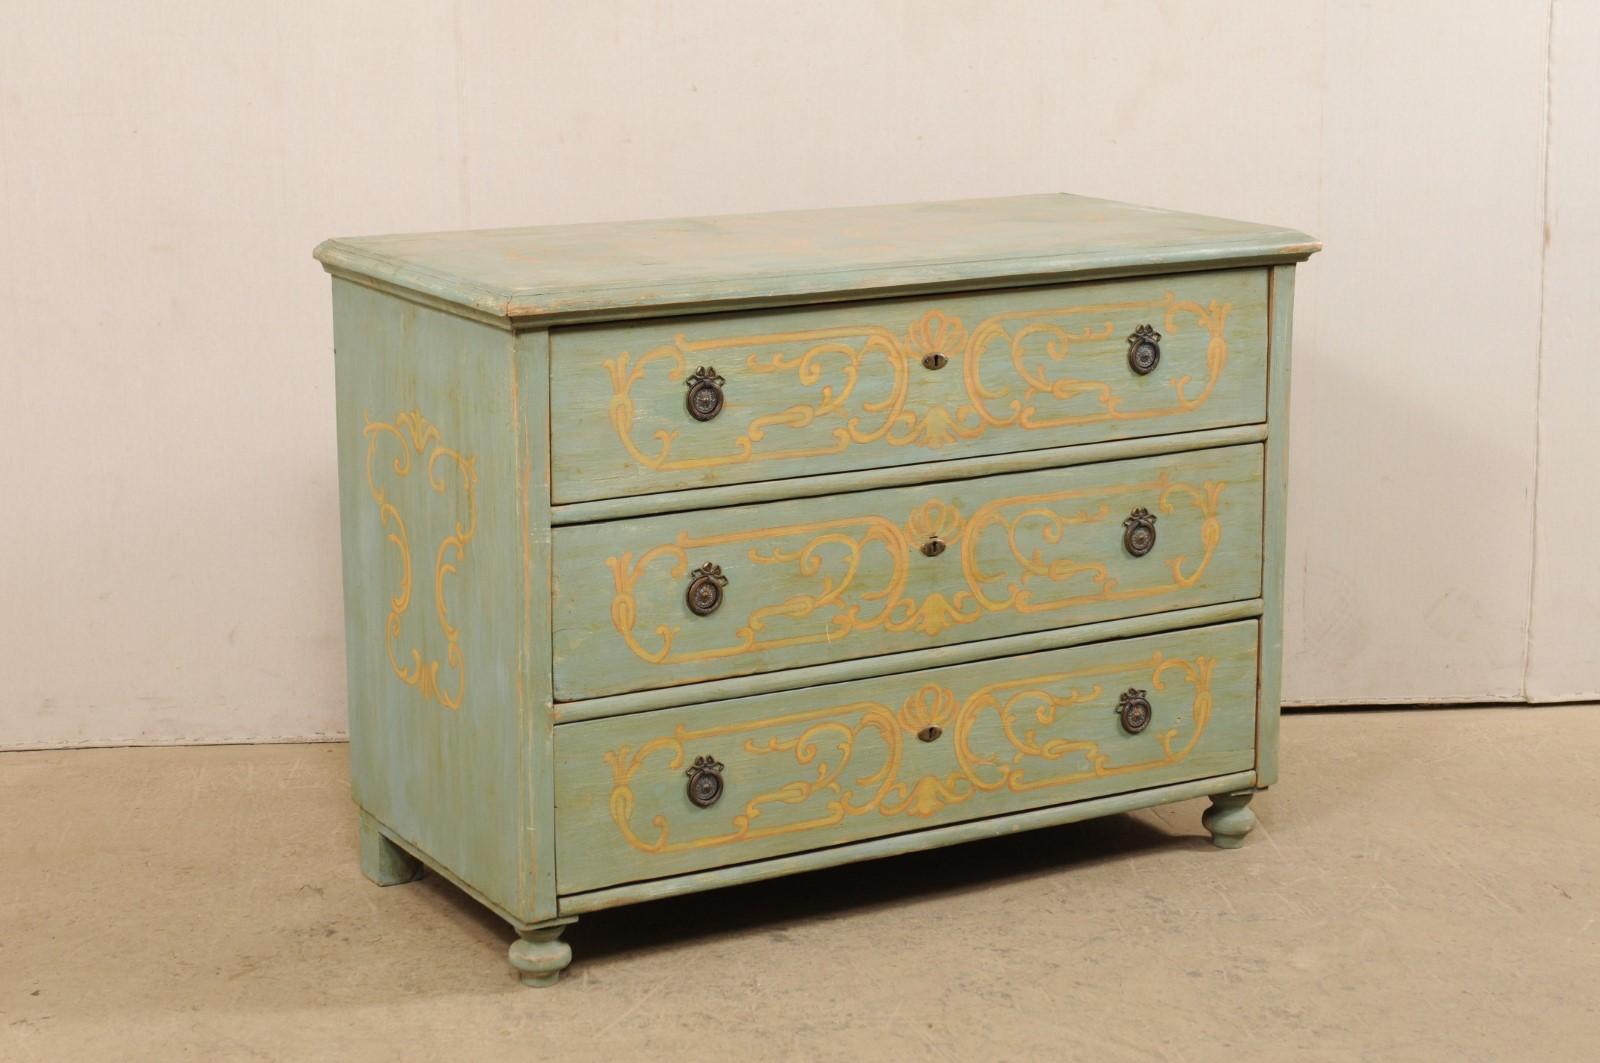 20th Century European Chest with Hand Painted Neoclassical-Inspired Decor and Faux Marble Top